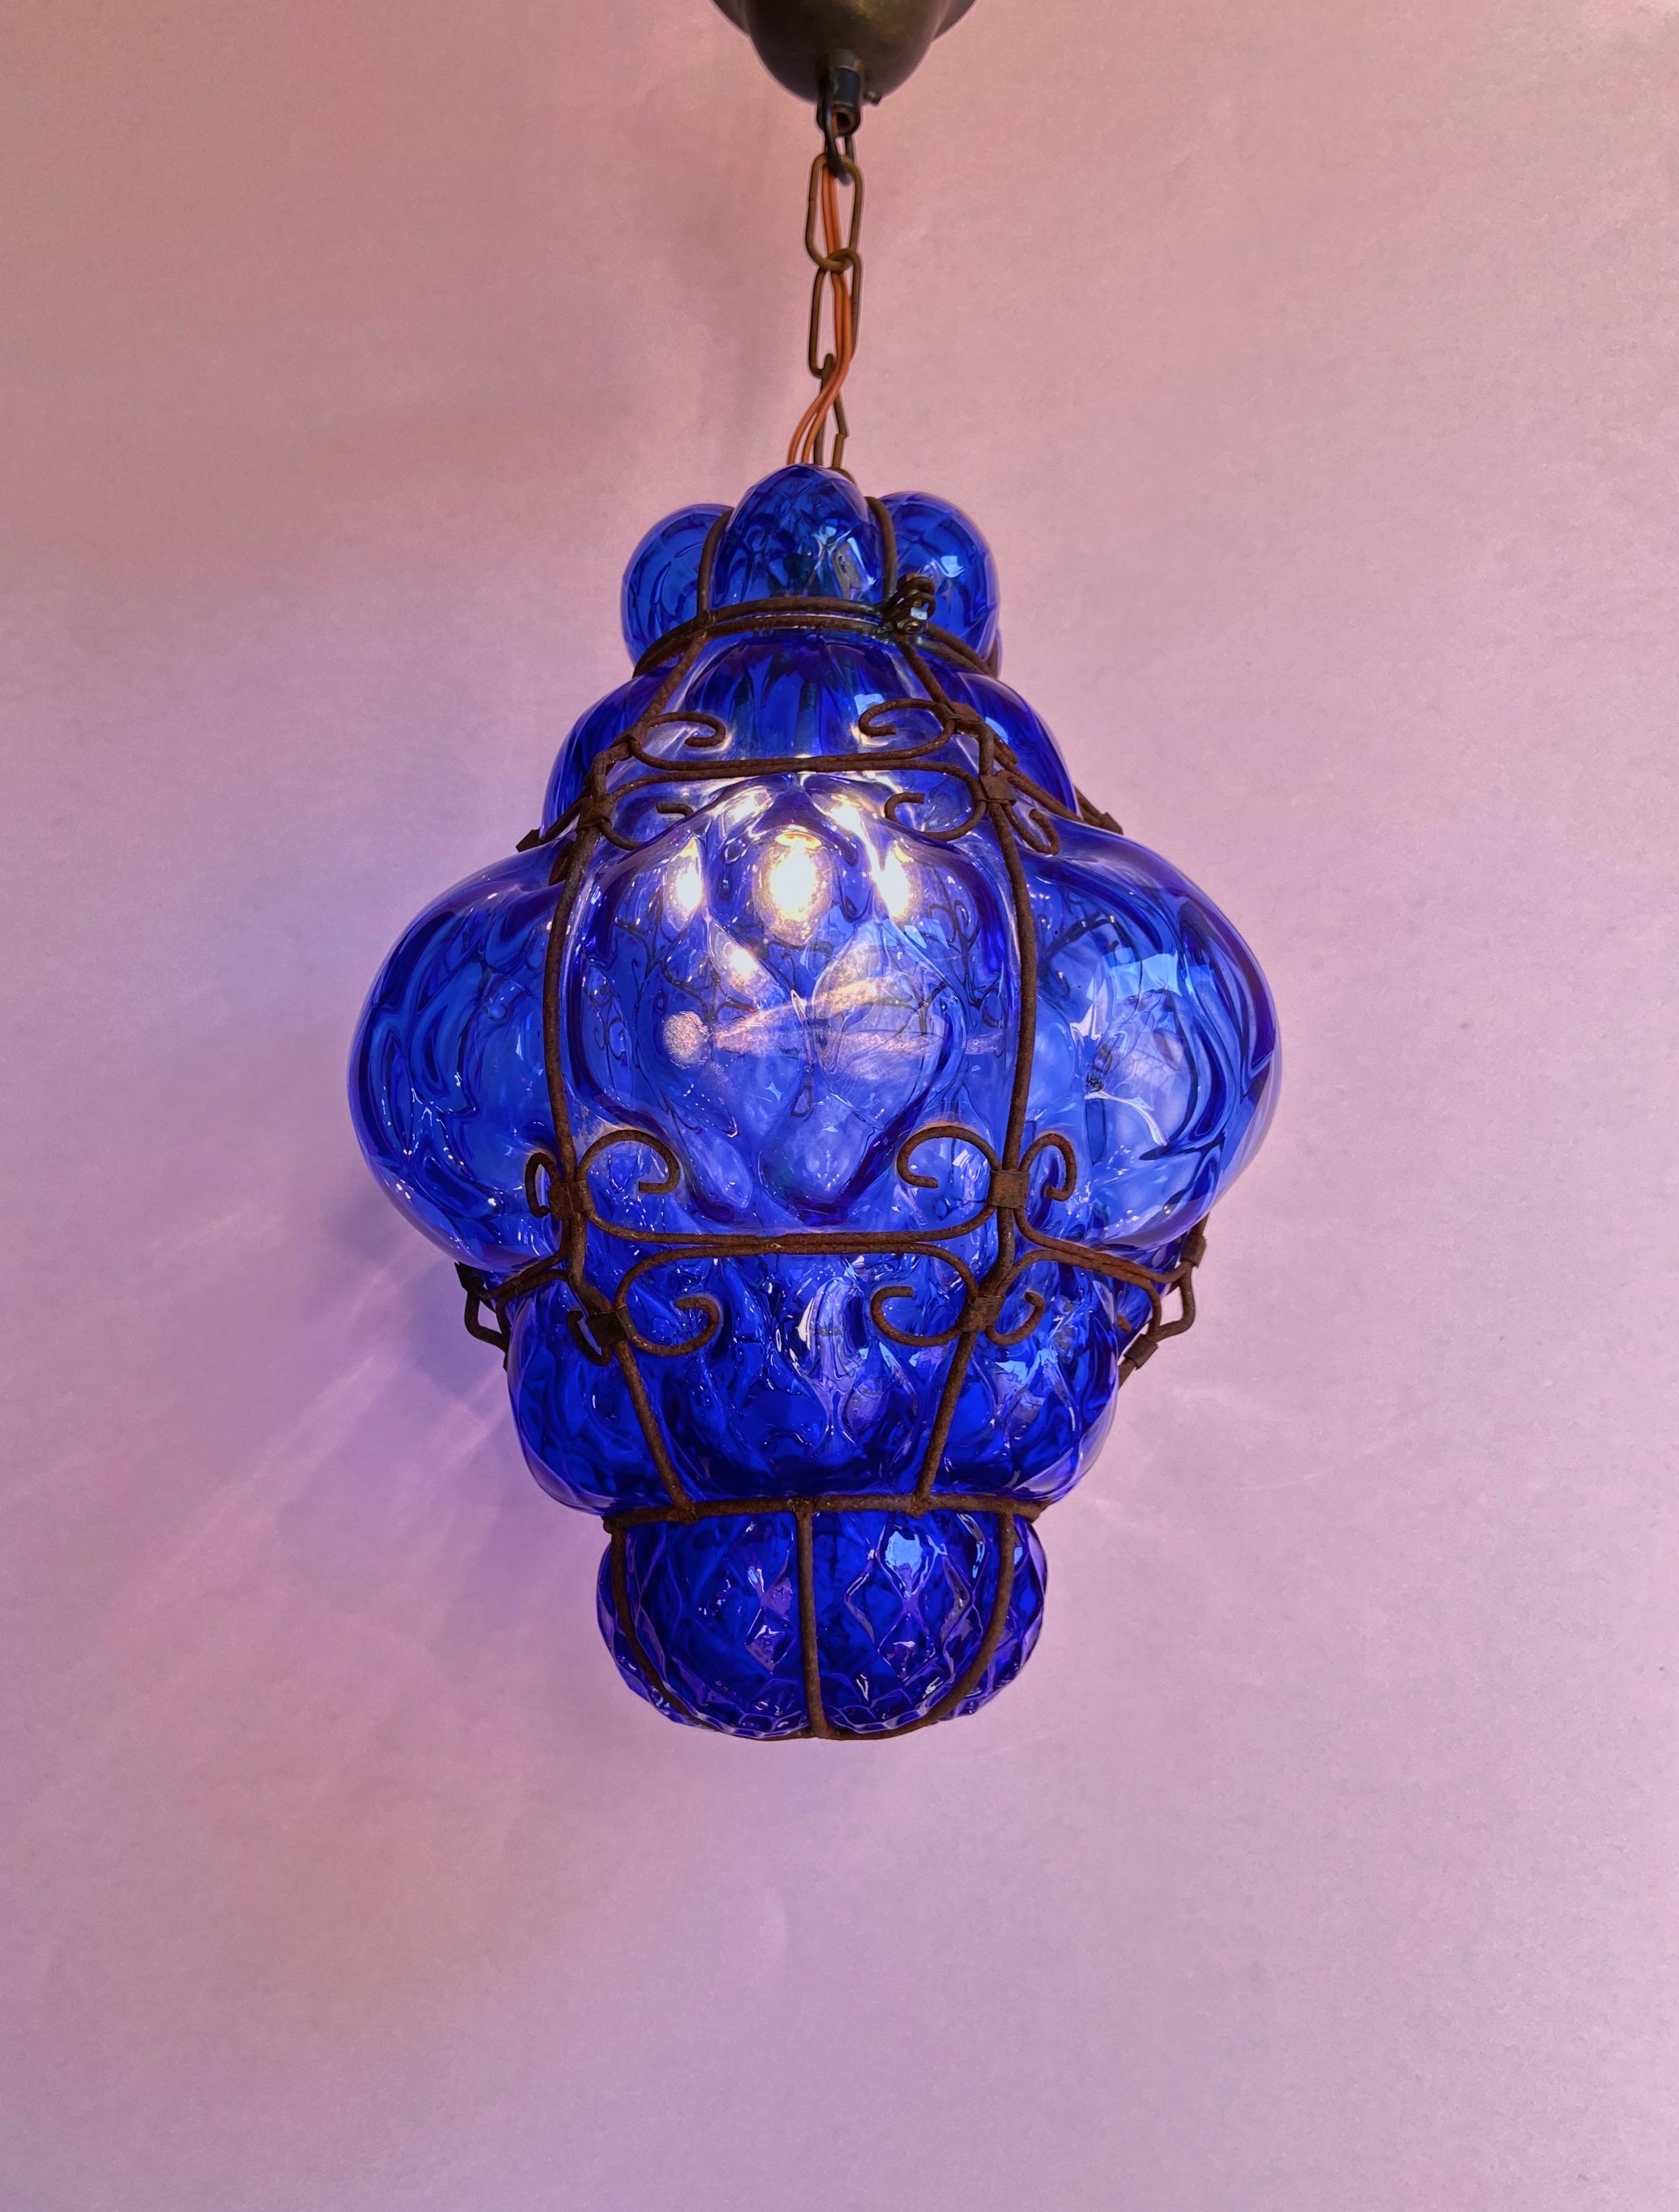 Midcentury Seguso Murano Cobalt Blue Blown Detailed Lantern Chandelier In Good Condition For Sale In Palermo, PA